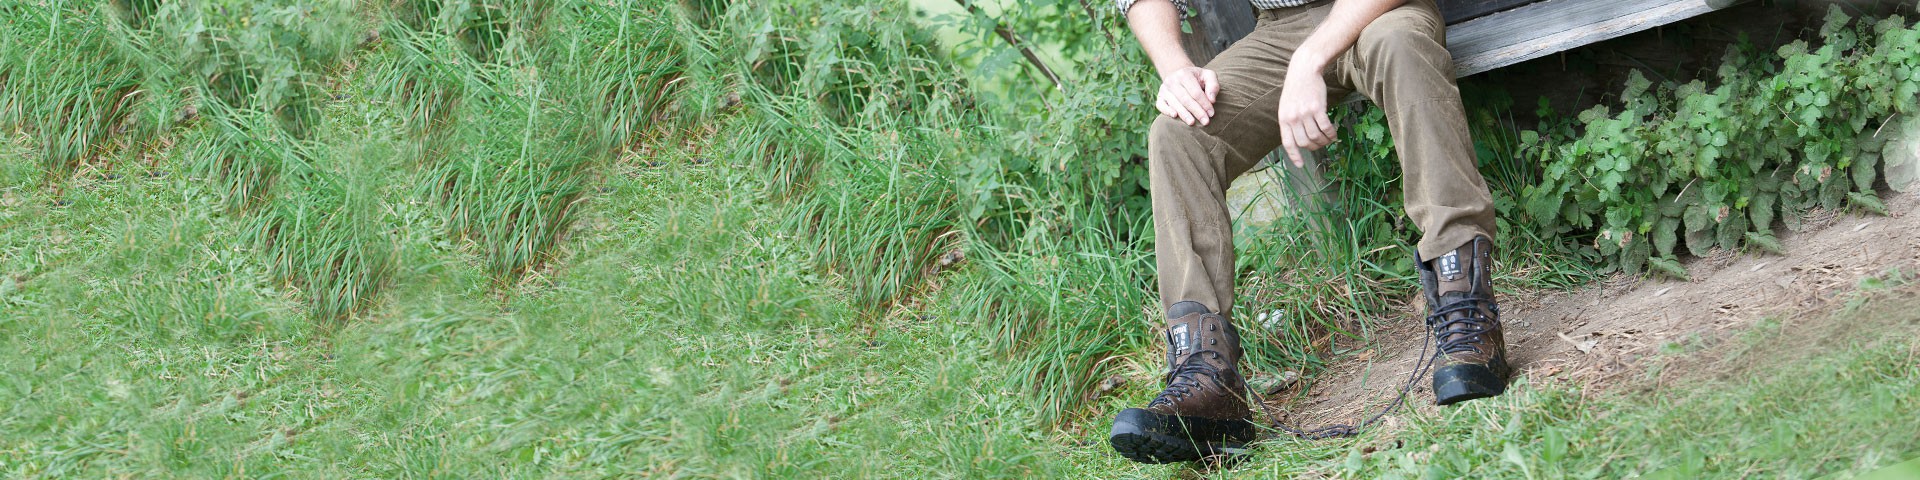 Hunting footwear -  Boots and shoes for Hunting | BESTARD